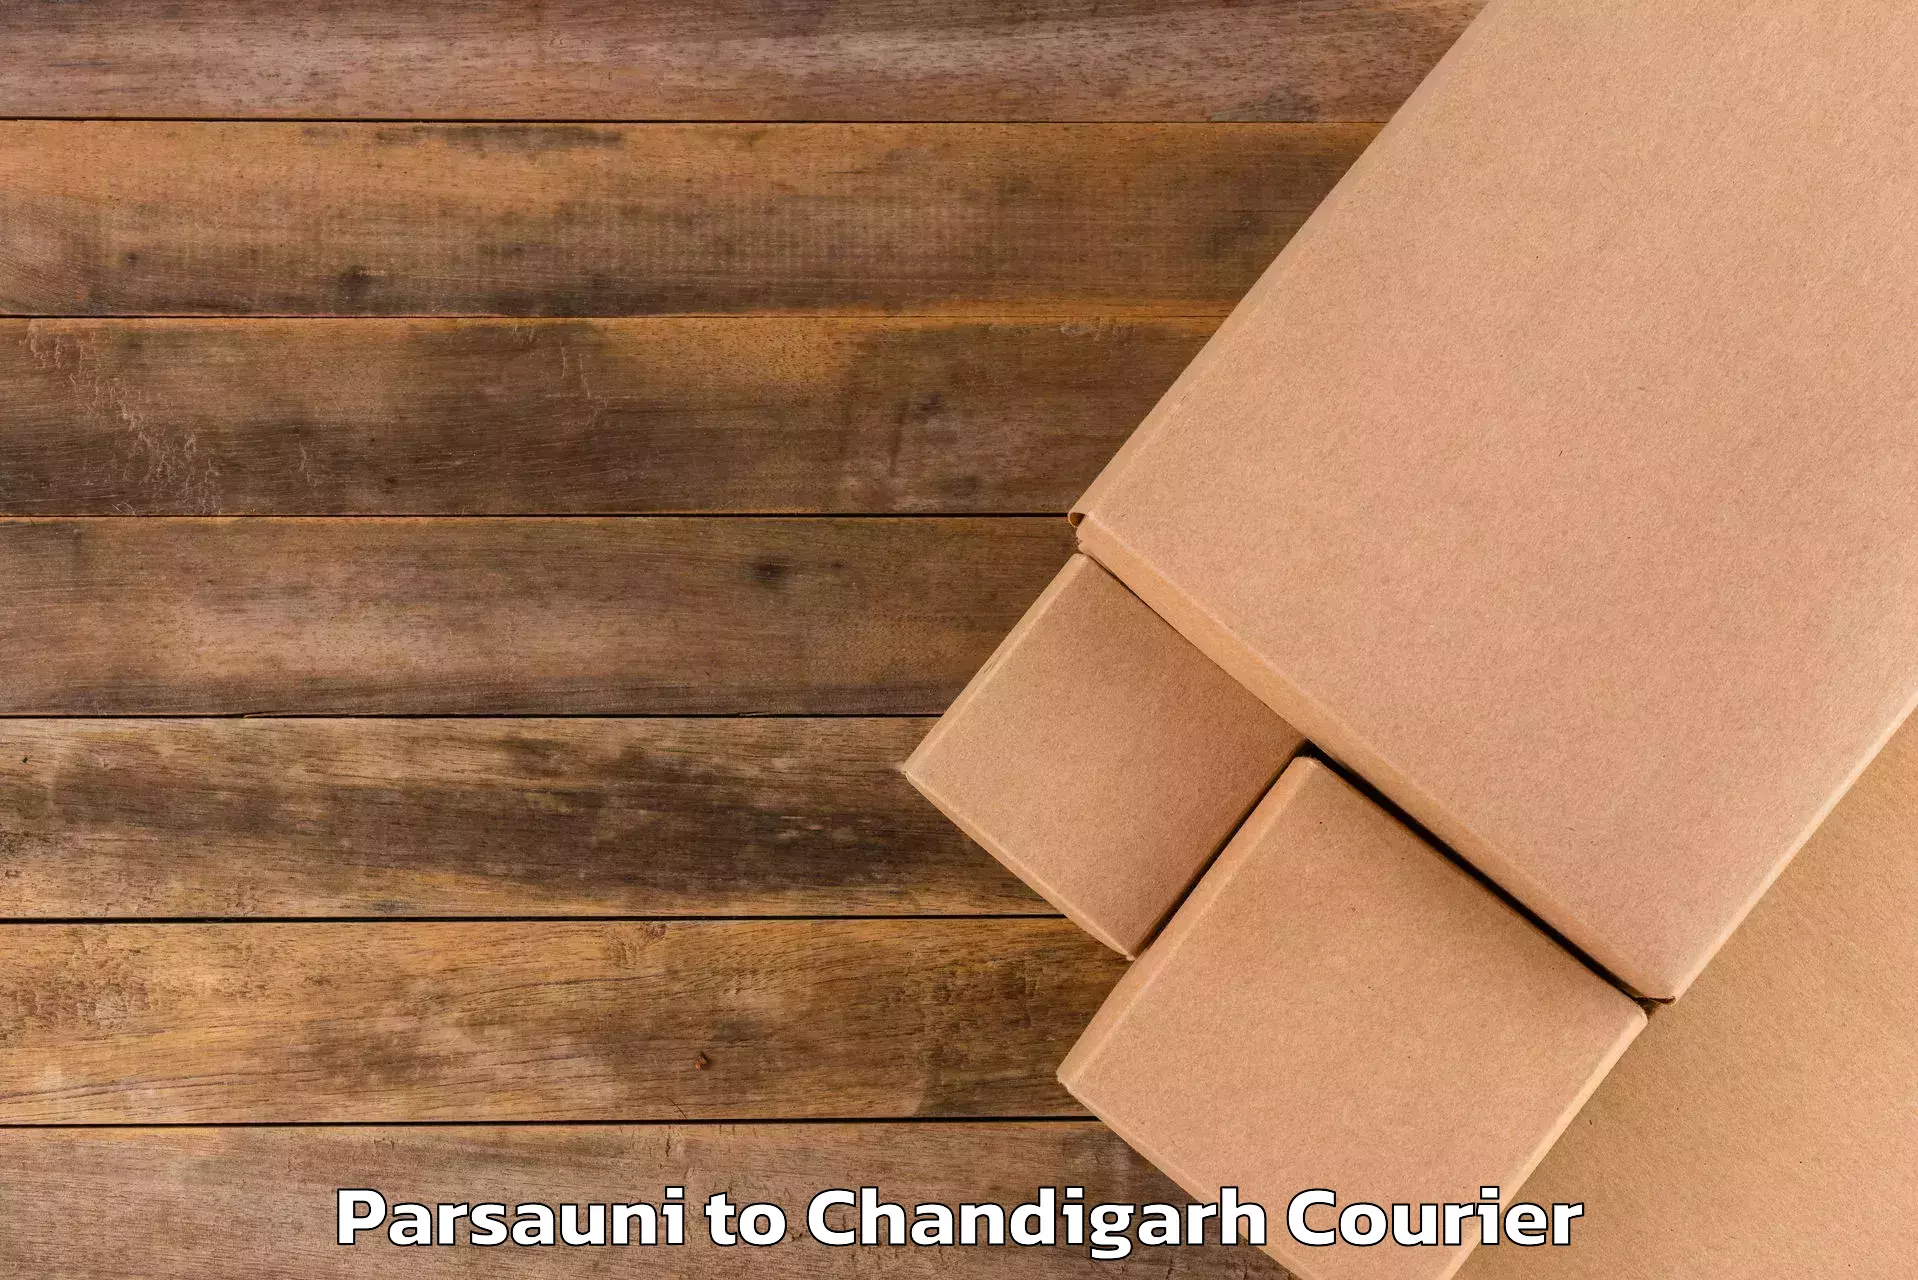 Luggage delivery network Parsauni to Chandigarh